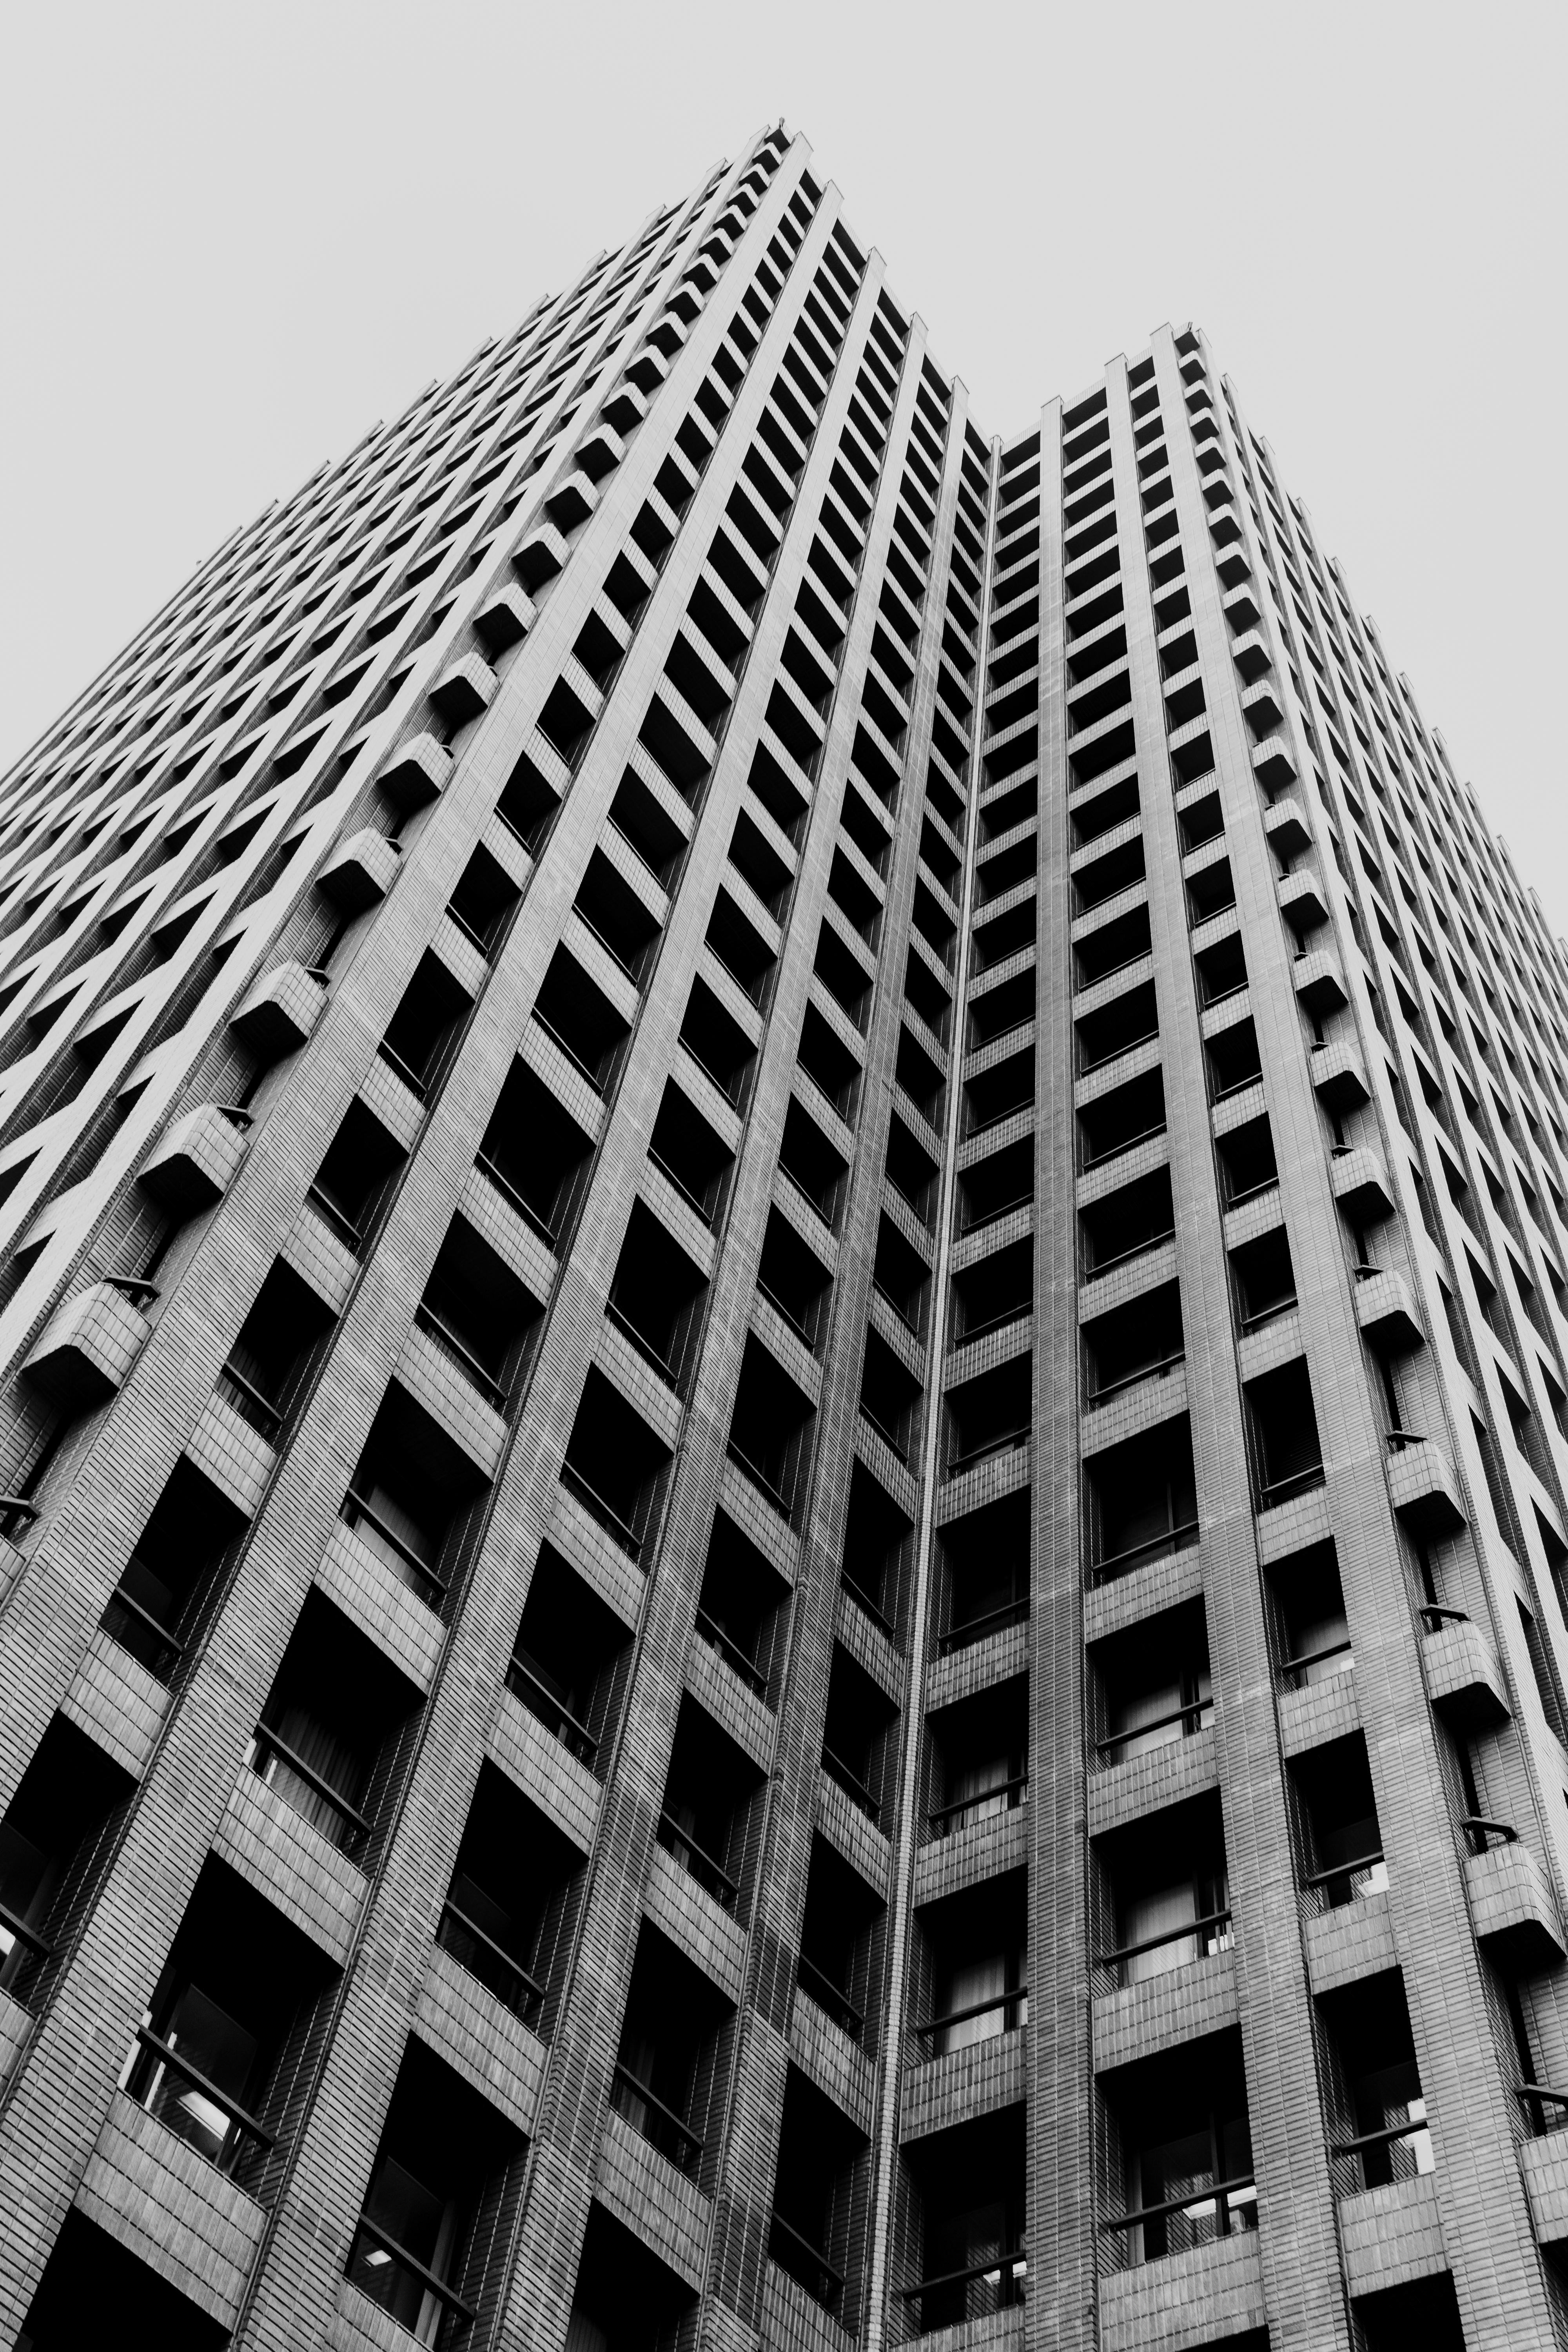 Pablo Saccinto Black and White Photograph - Building in Black and White